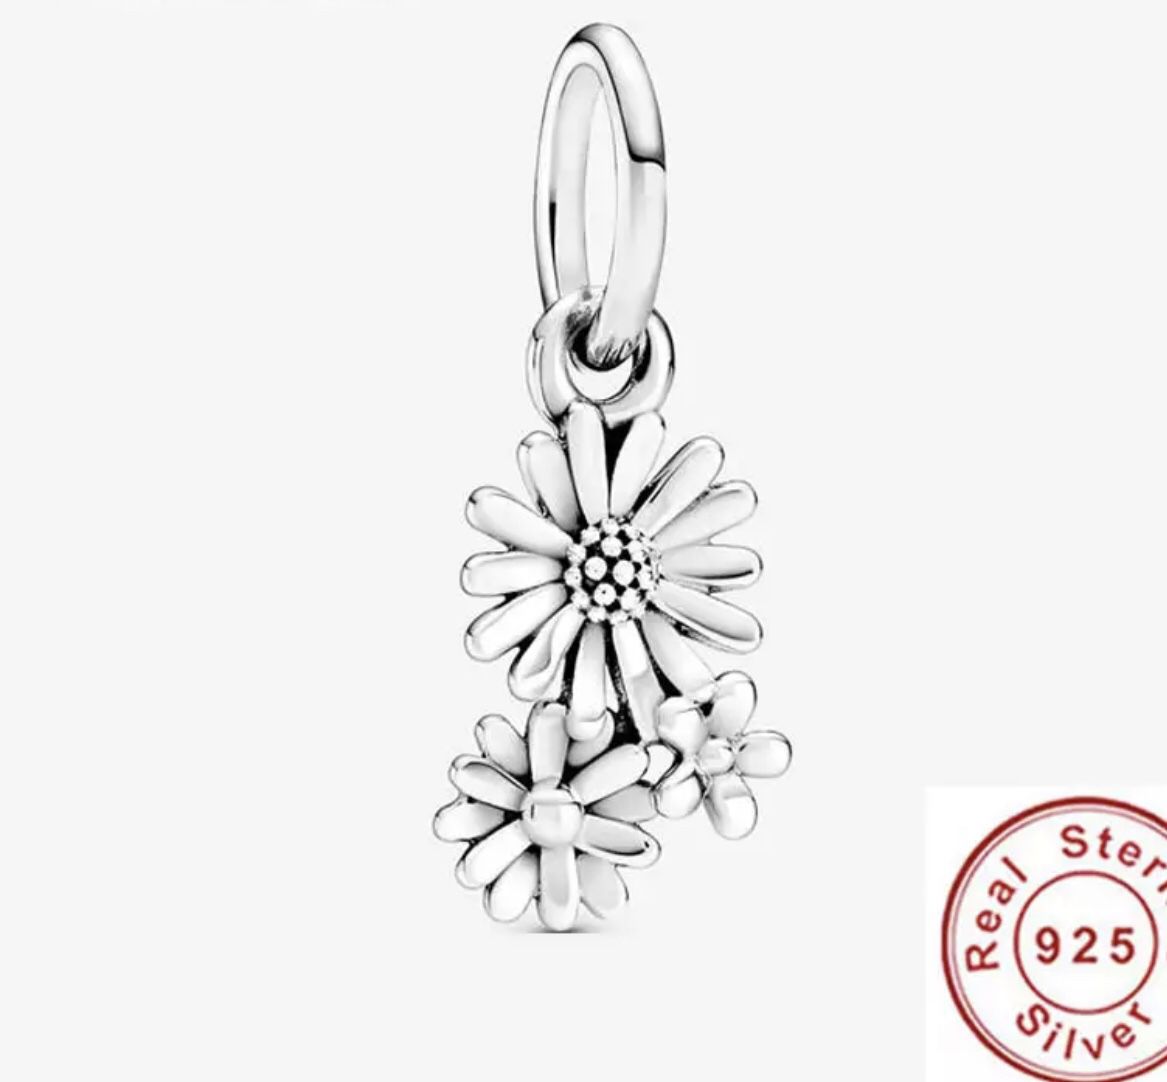 Sterling Silver daisy charm